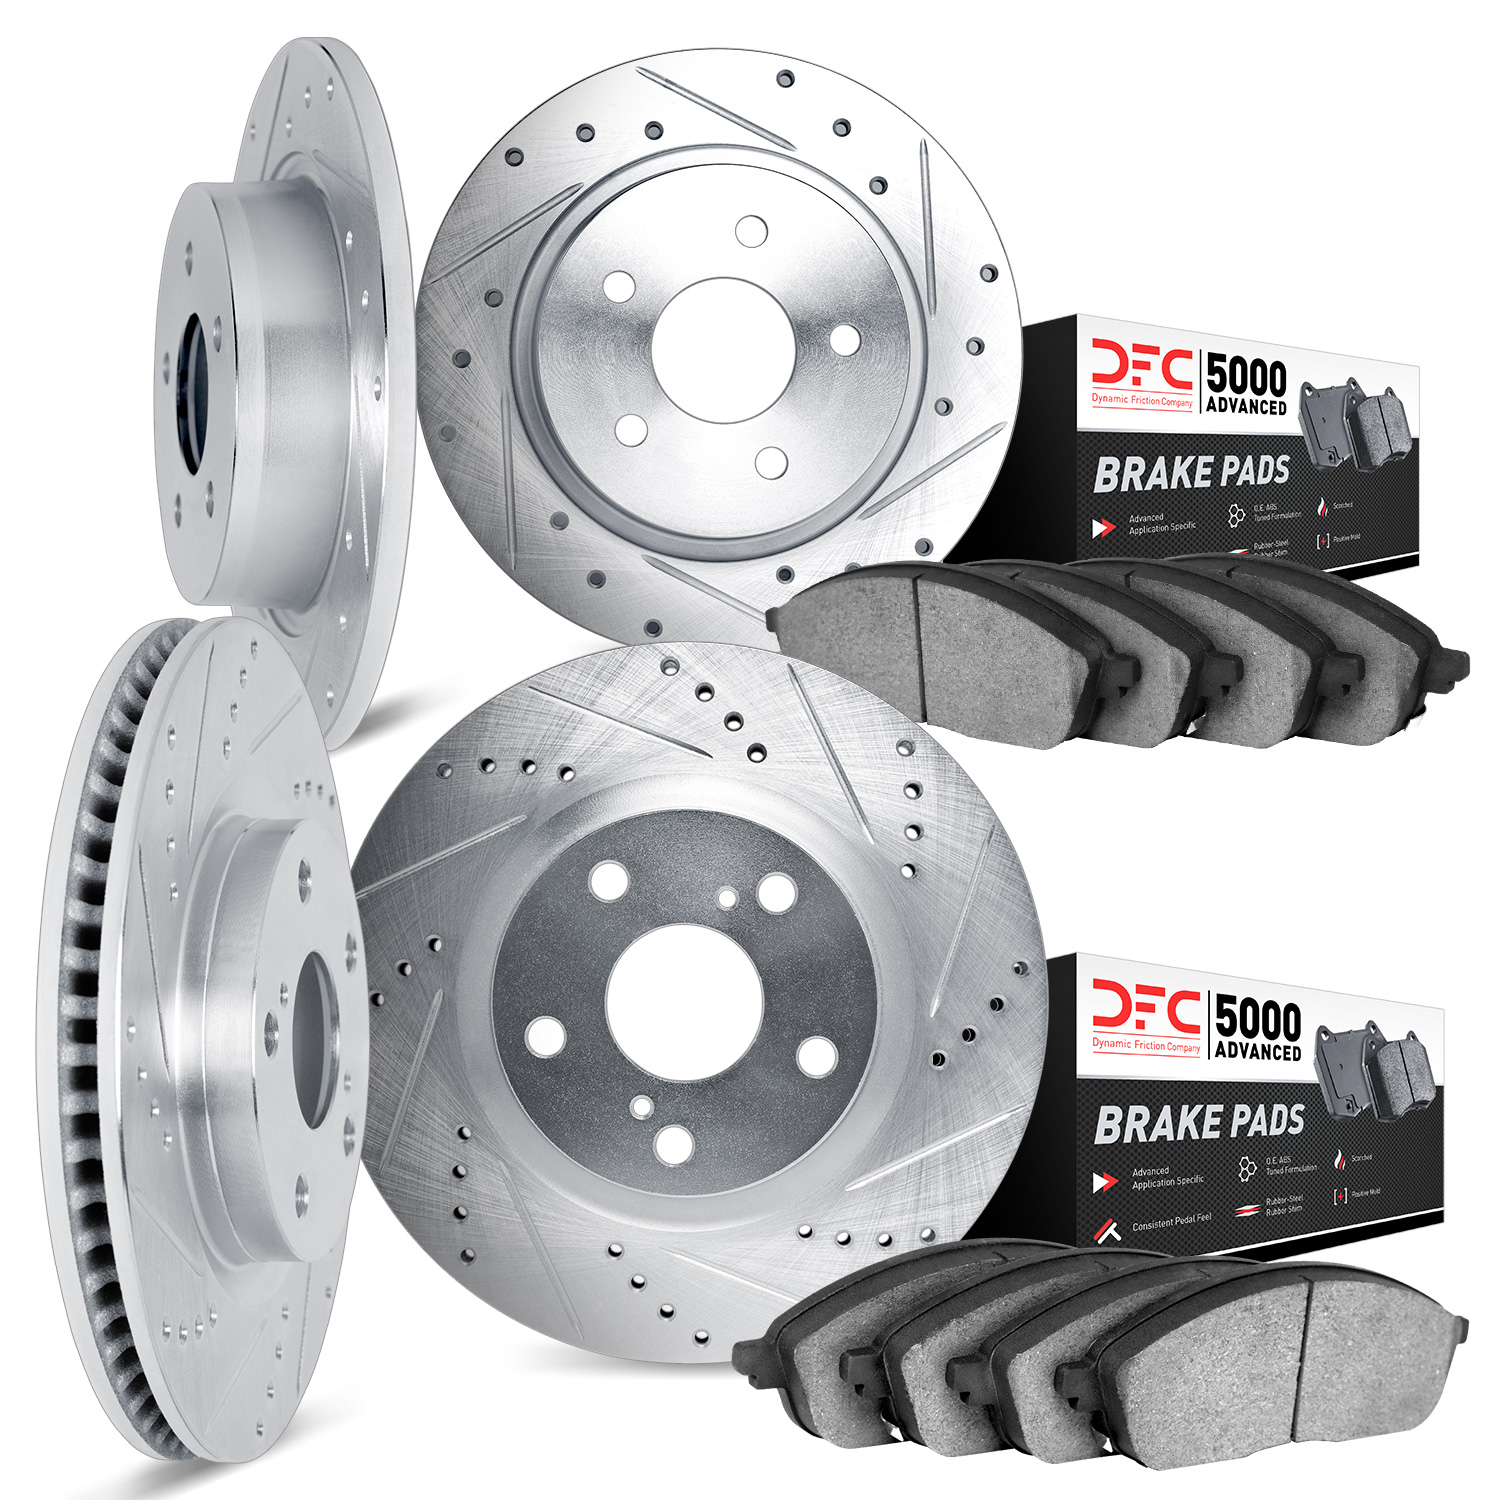 7504-59045 Drilled/Slotted Brake Rotors w/5000 Advanced Brake Pads Kit [Silver], 2016-2016 Acura/Honda, Position: Front and Rear